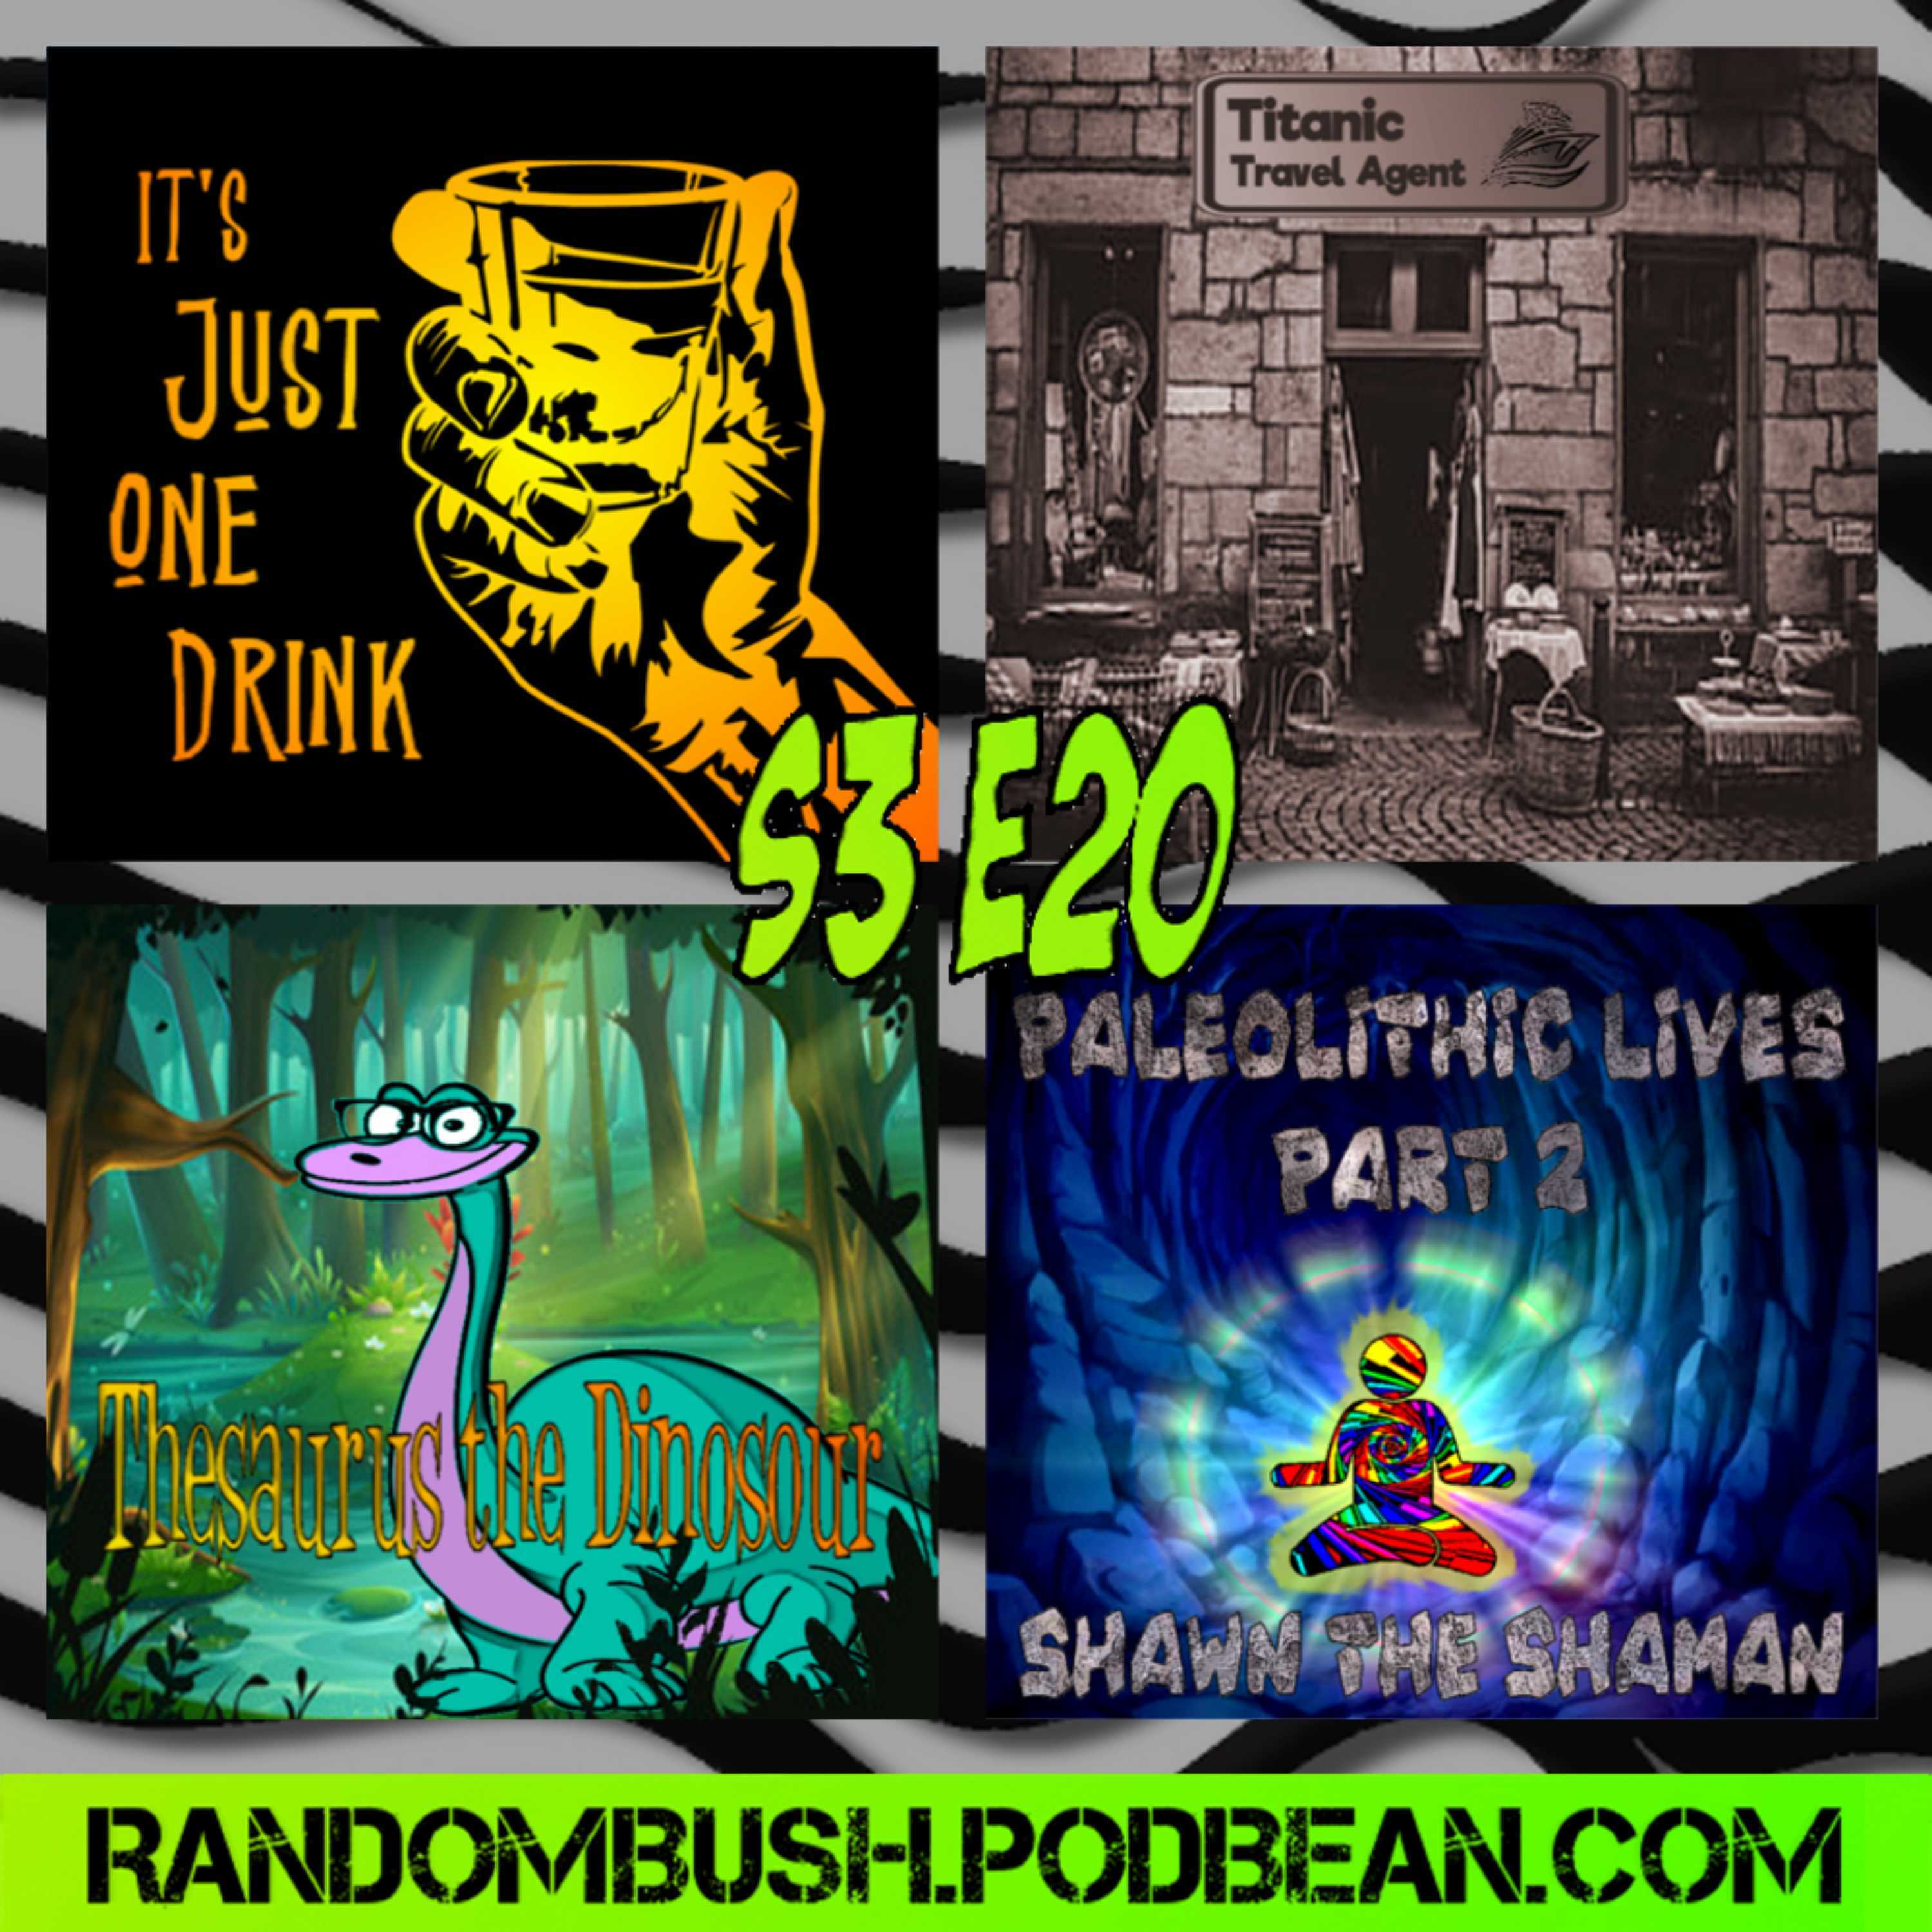 3.20 - Just one drink, Titanic Travel Agent, Paleolithic lives Part 2: Shawn the Shamen, and Thesaurus the Dinosour